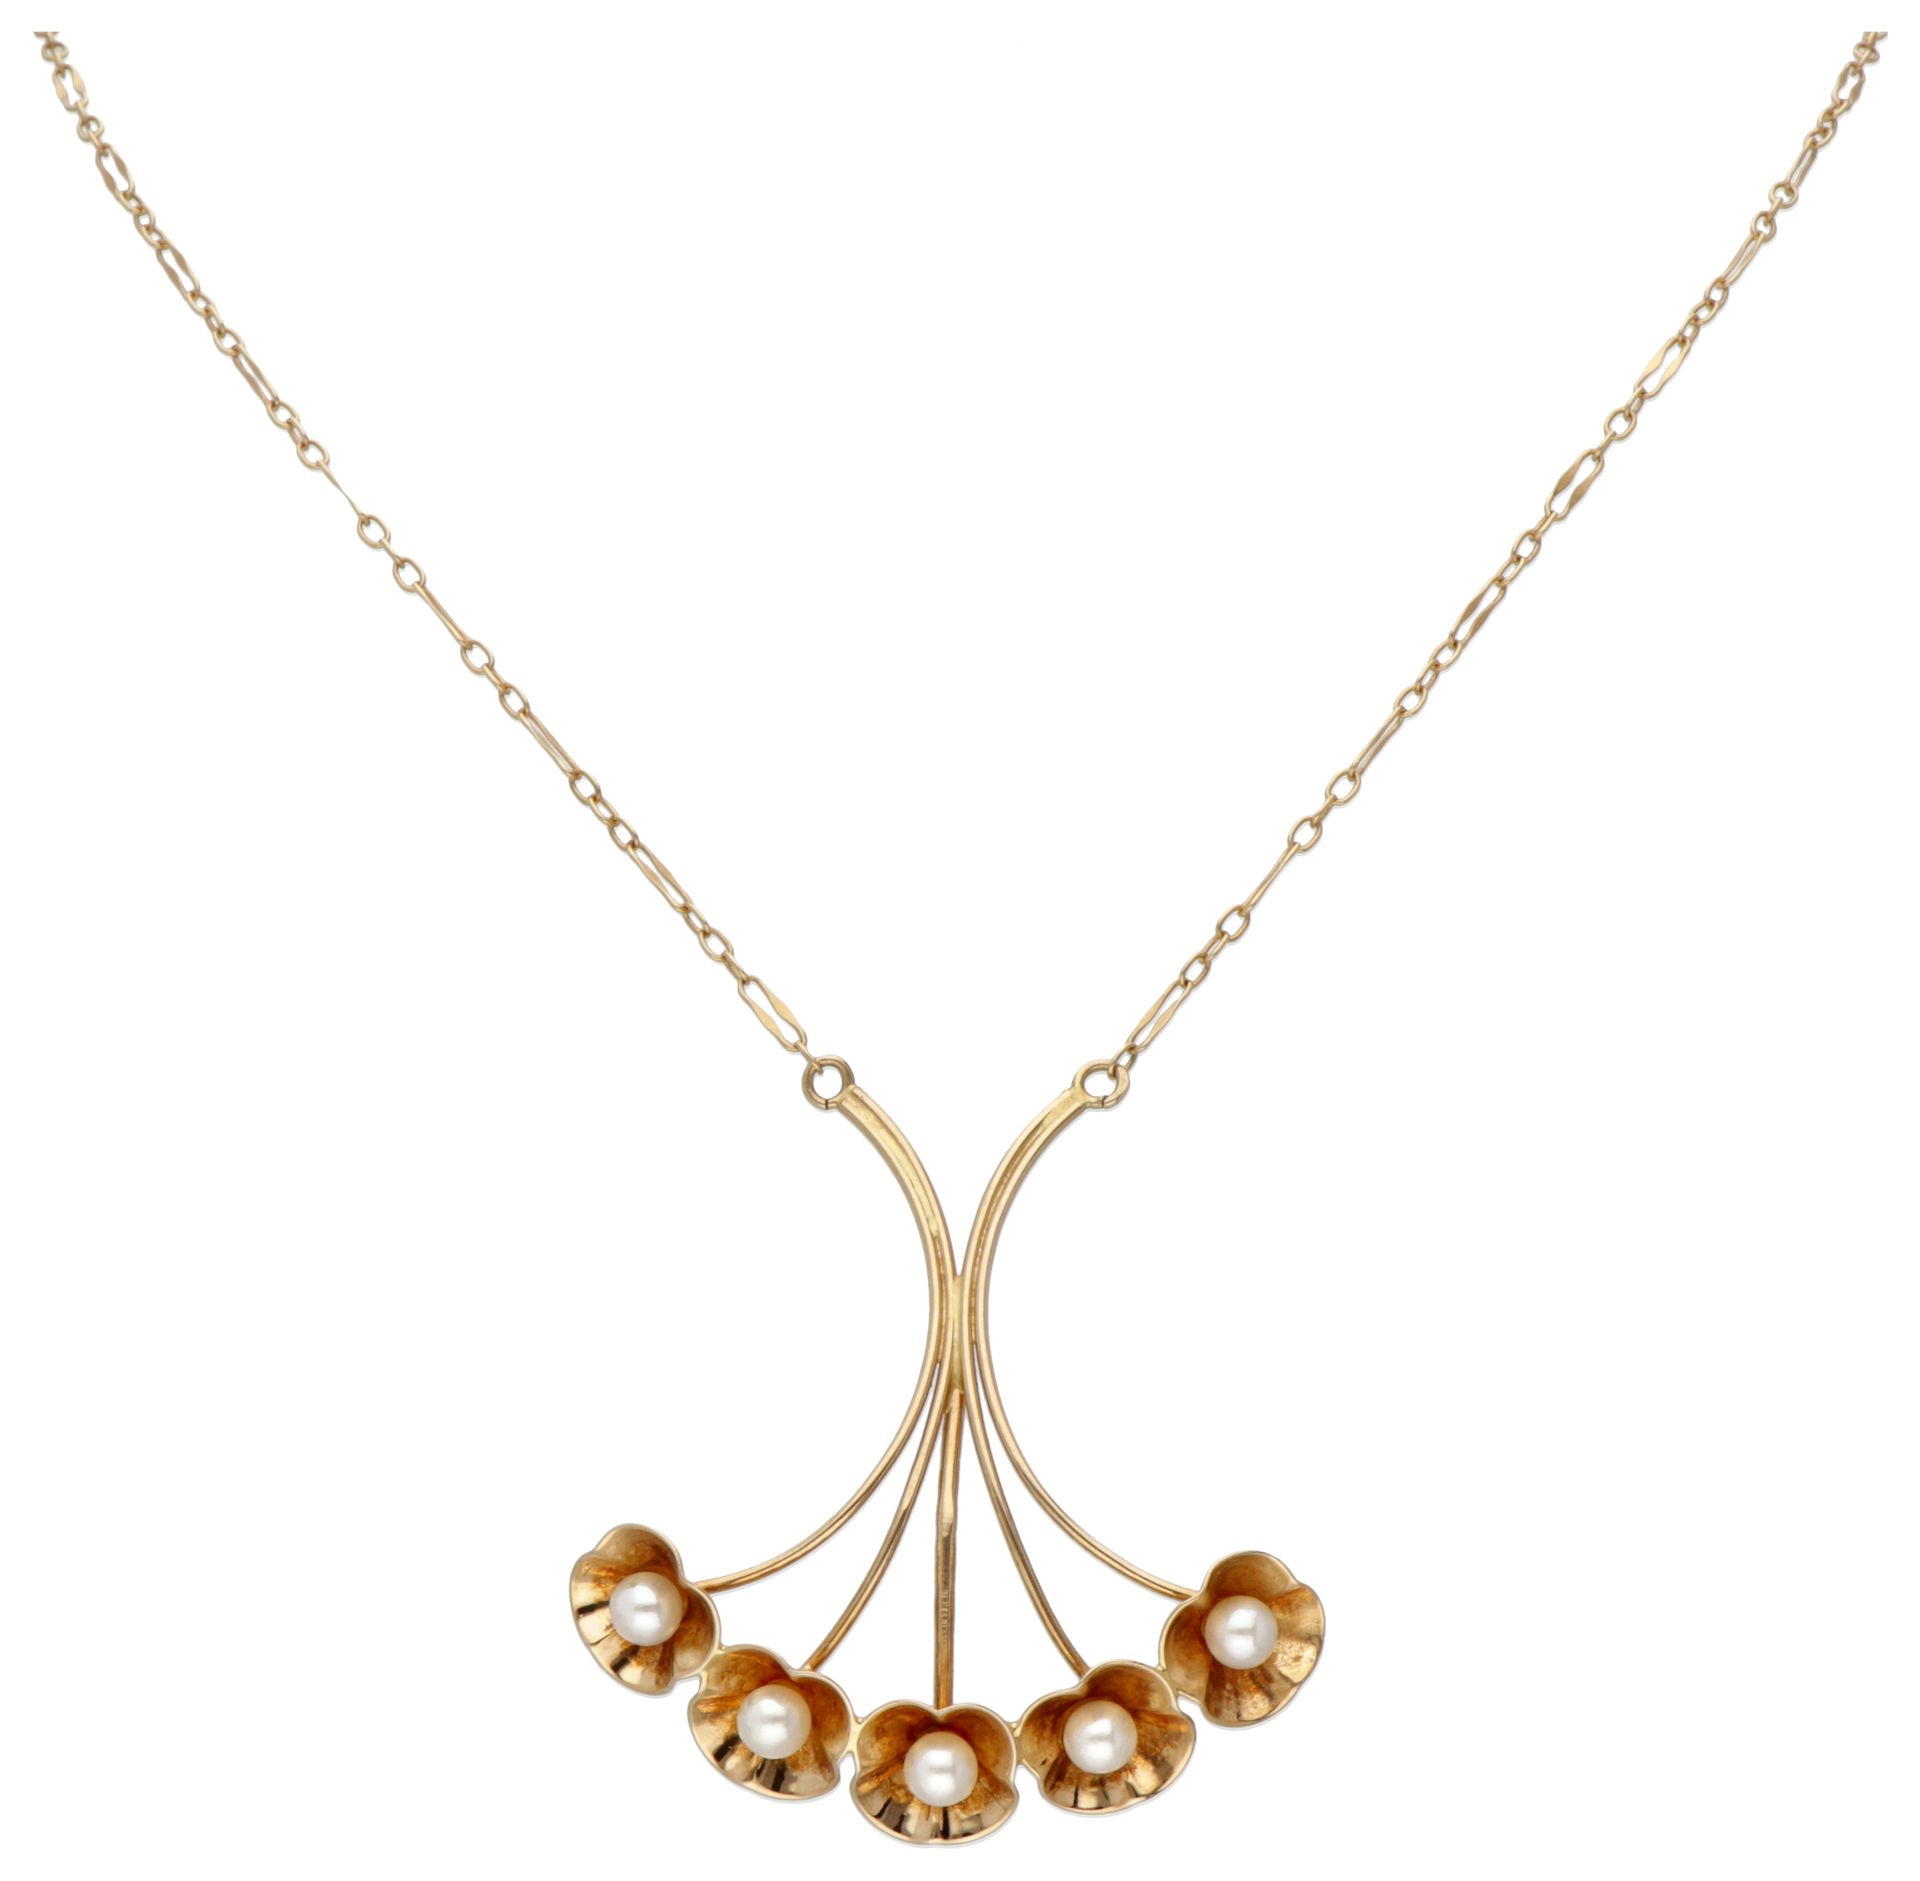 18K. Yellow gold Alton necklace and pendant set with pearls. Hallmarks: 750, Alt&hellip;